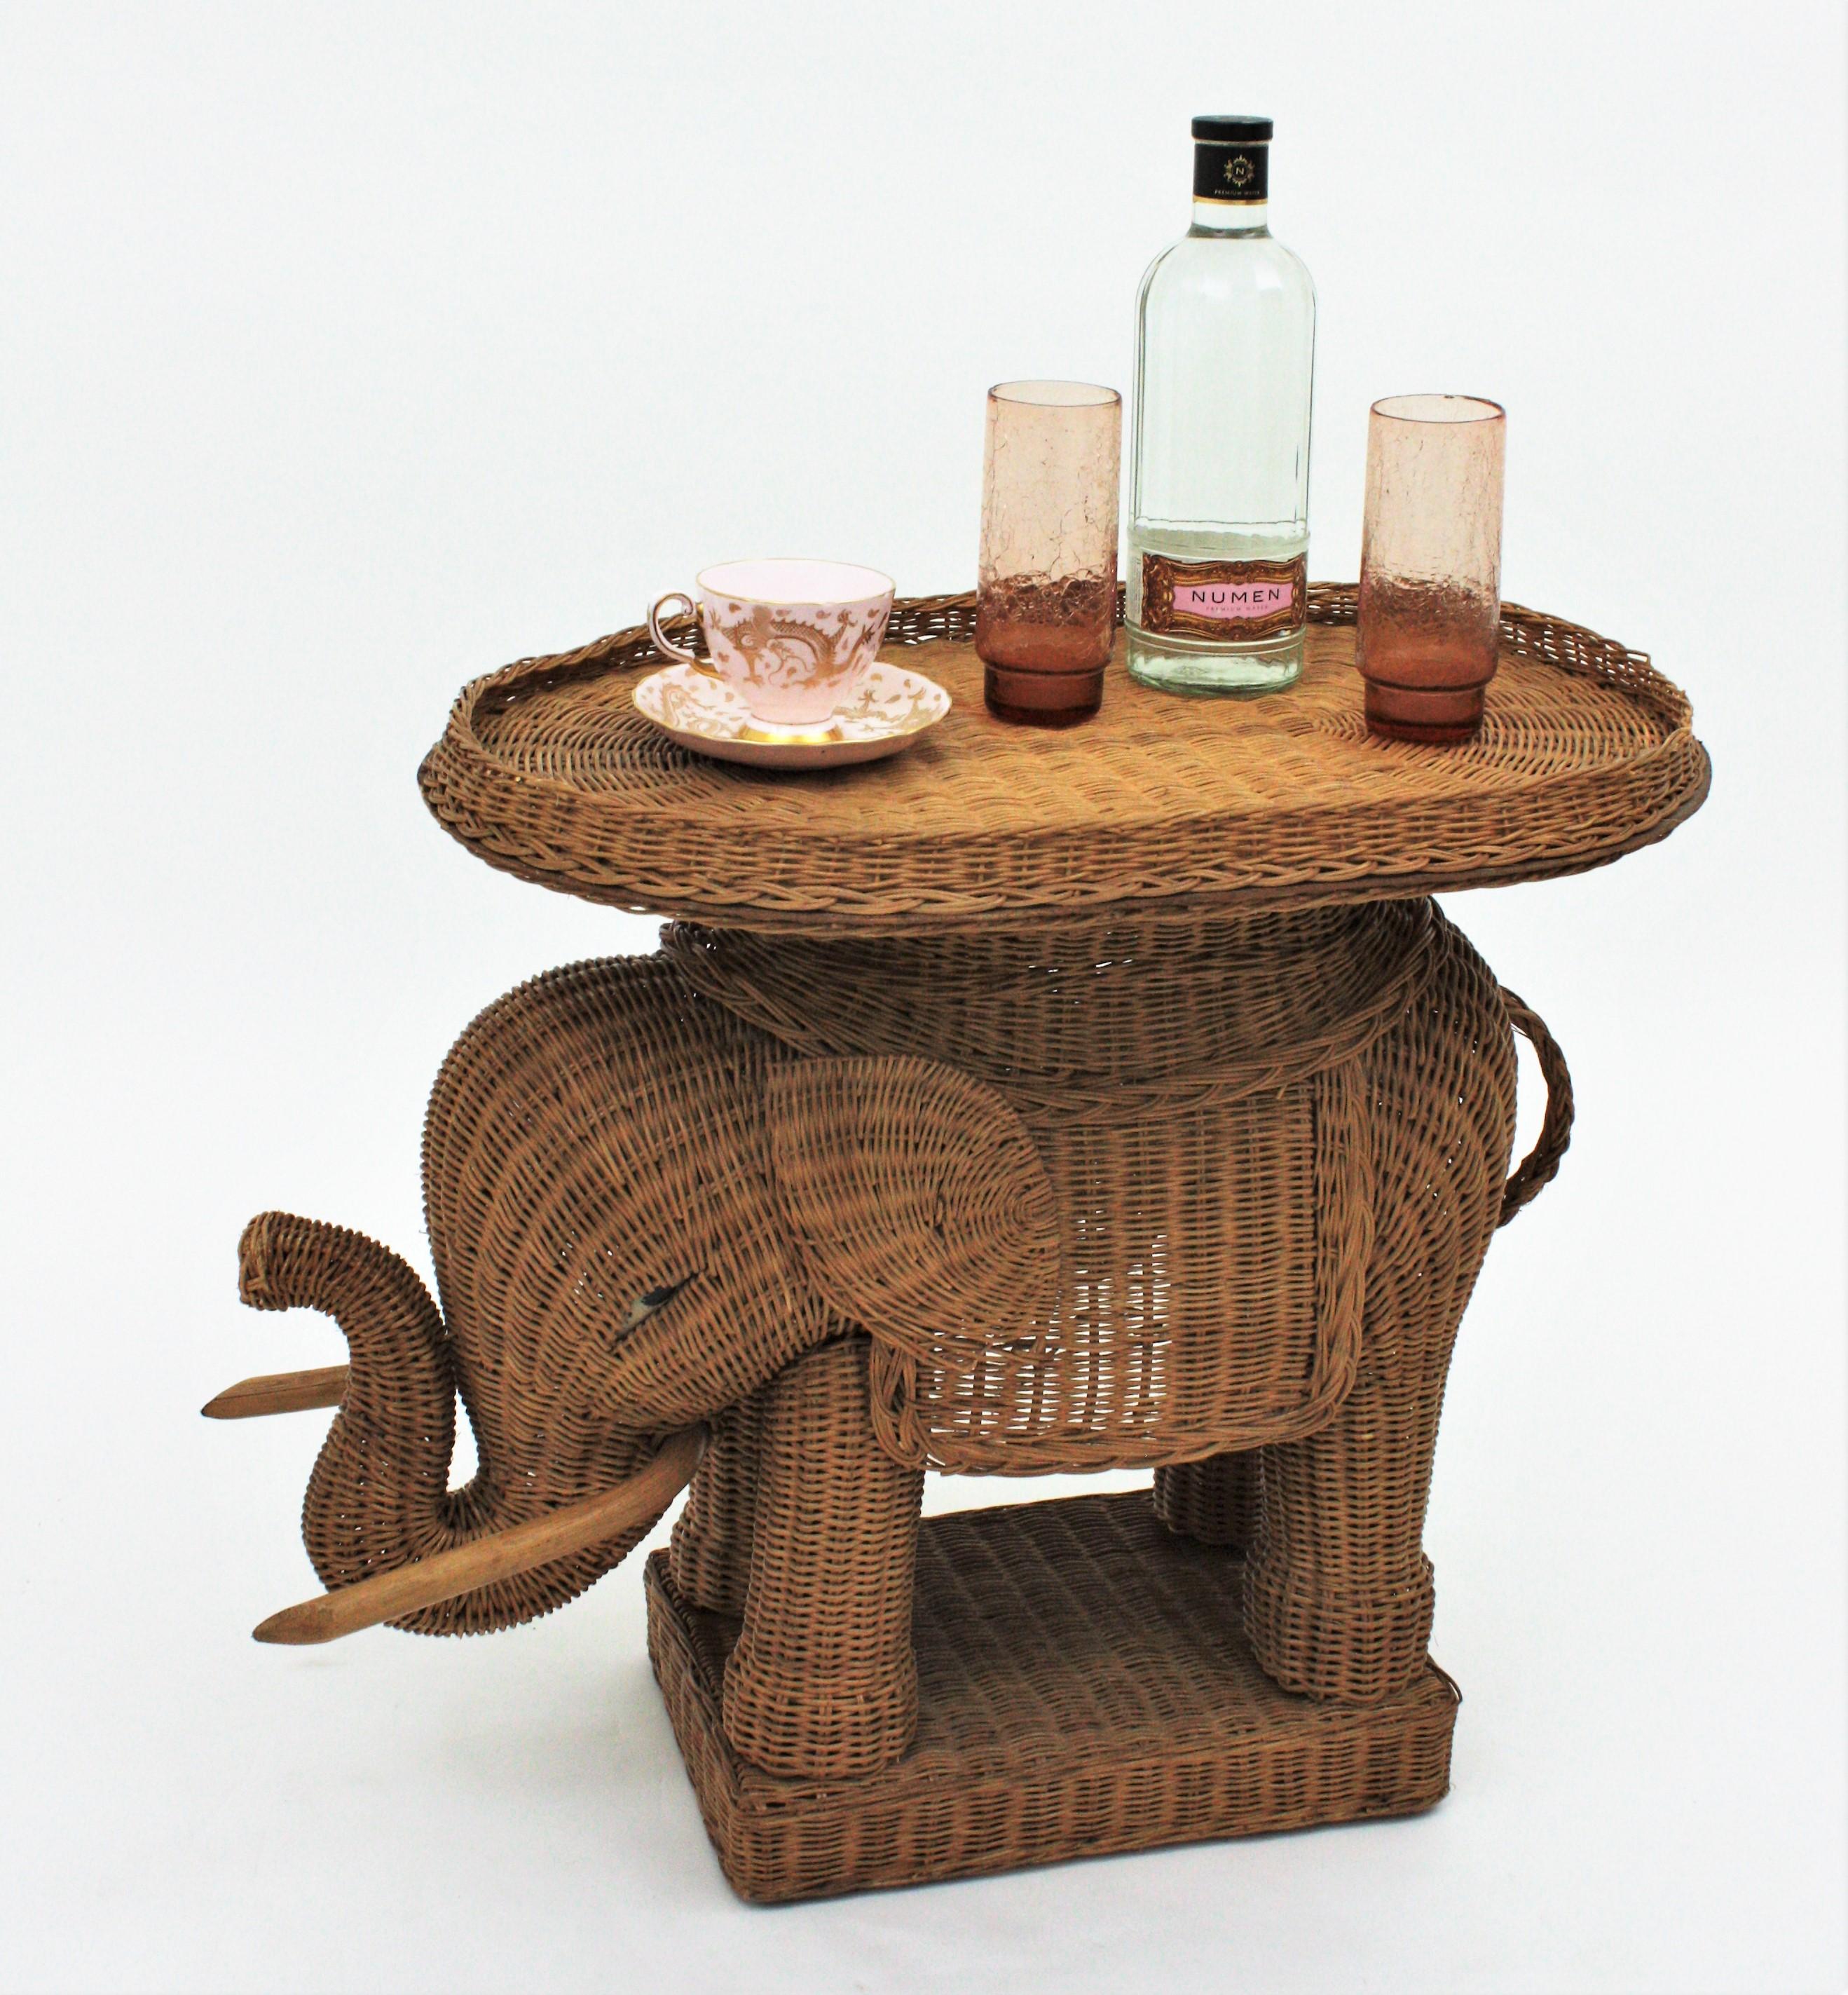 Eye-catching woven rattan end table or drinks table with removable tray top. France, 1950s
This elephant shaped end table stand was beautifully constructed in hand braided rattan / wicker accented with wood tusks. The tray top is removable so it